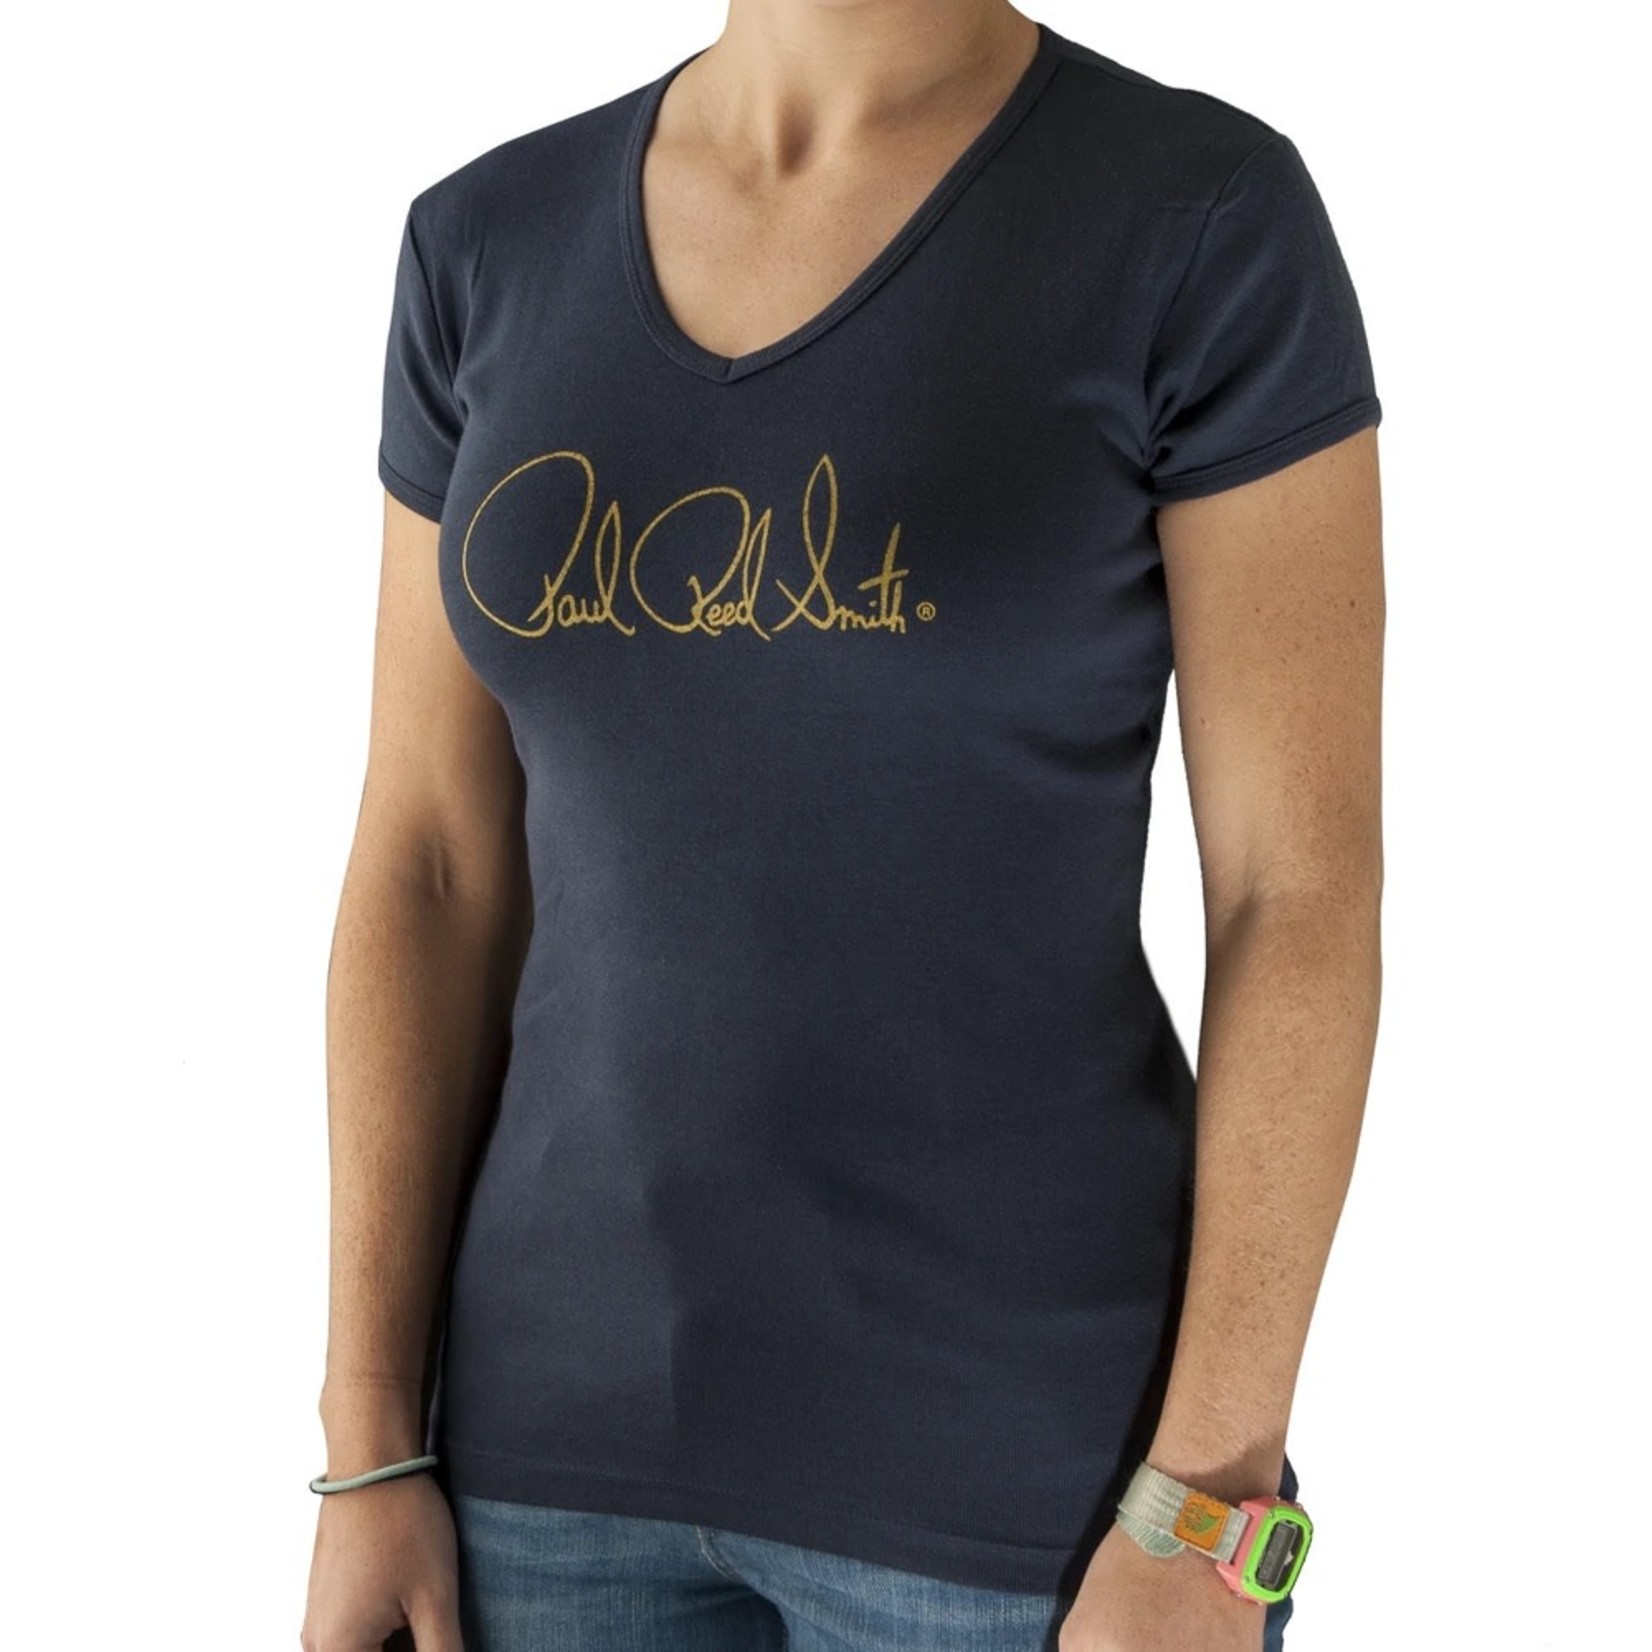 Paul Reed Smith PRS Women's Signature Tee